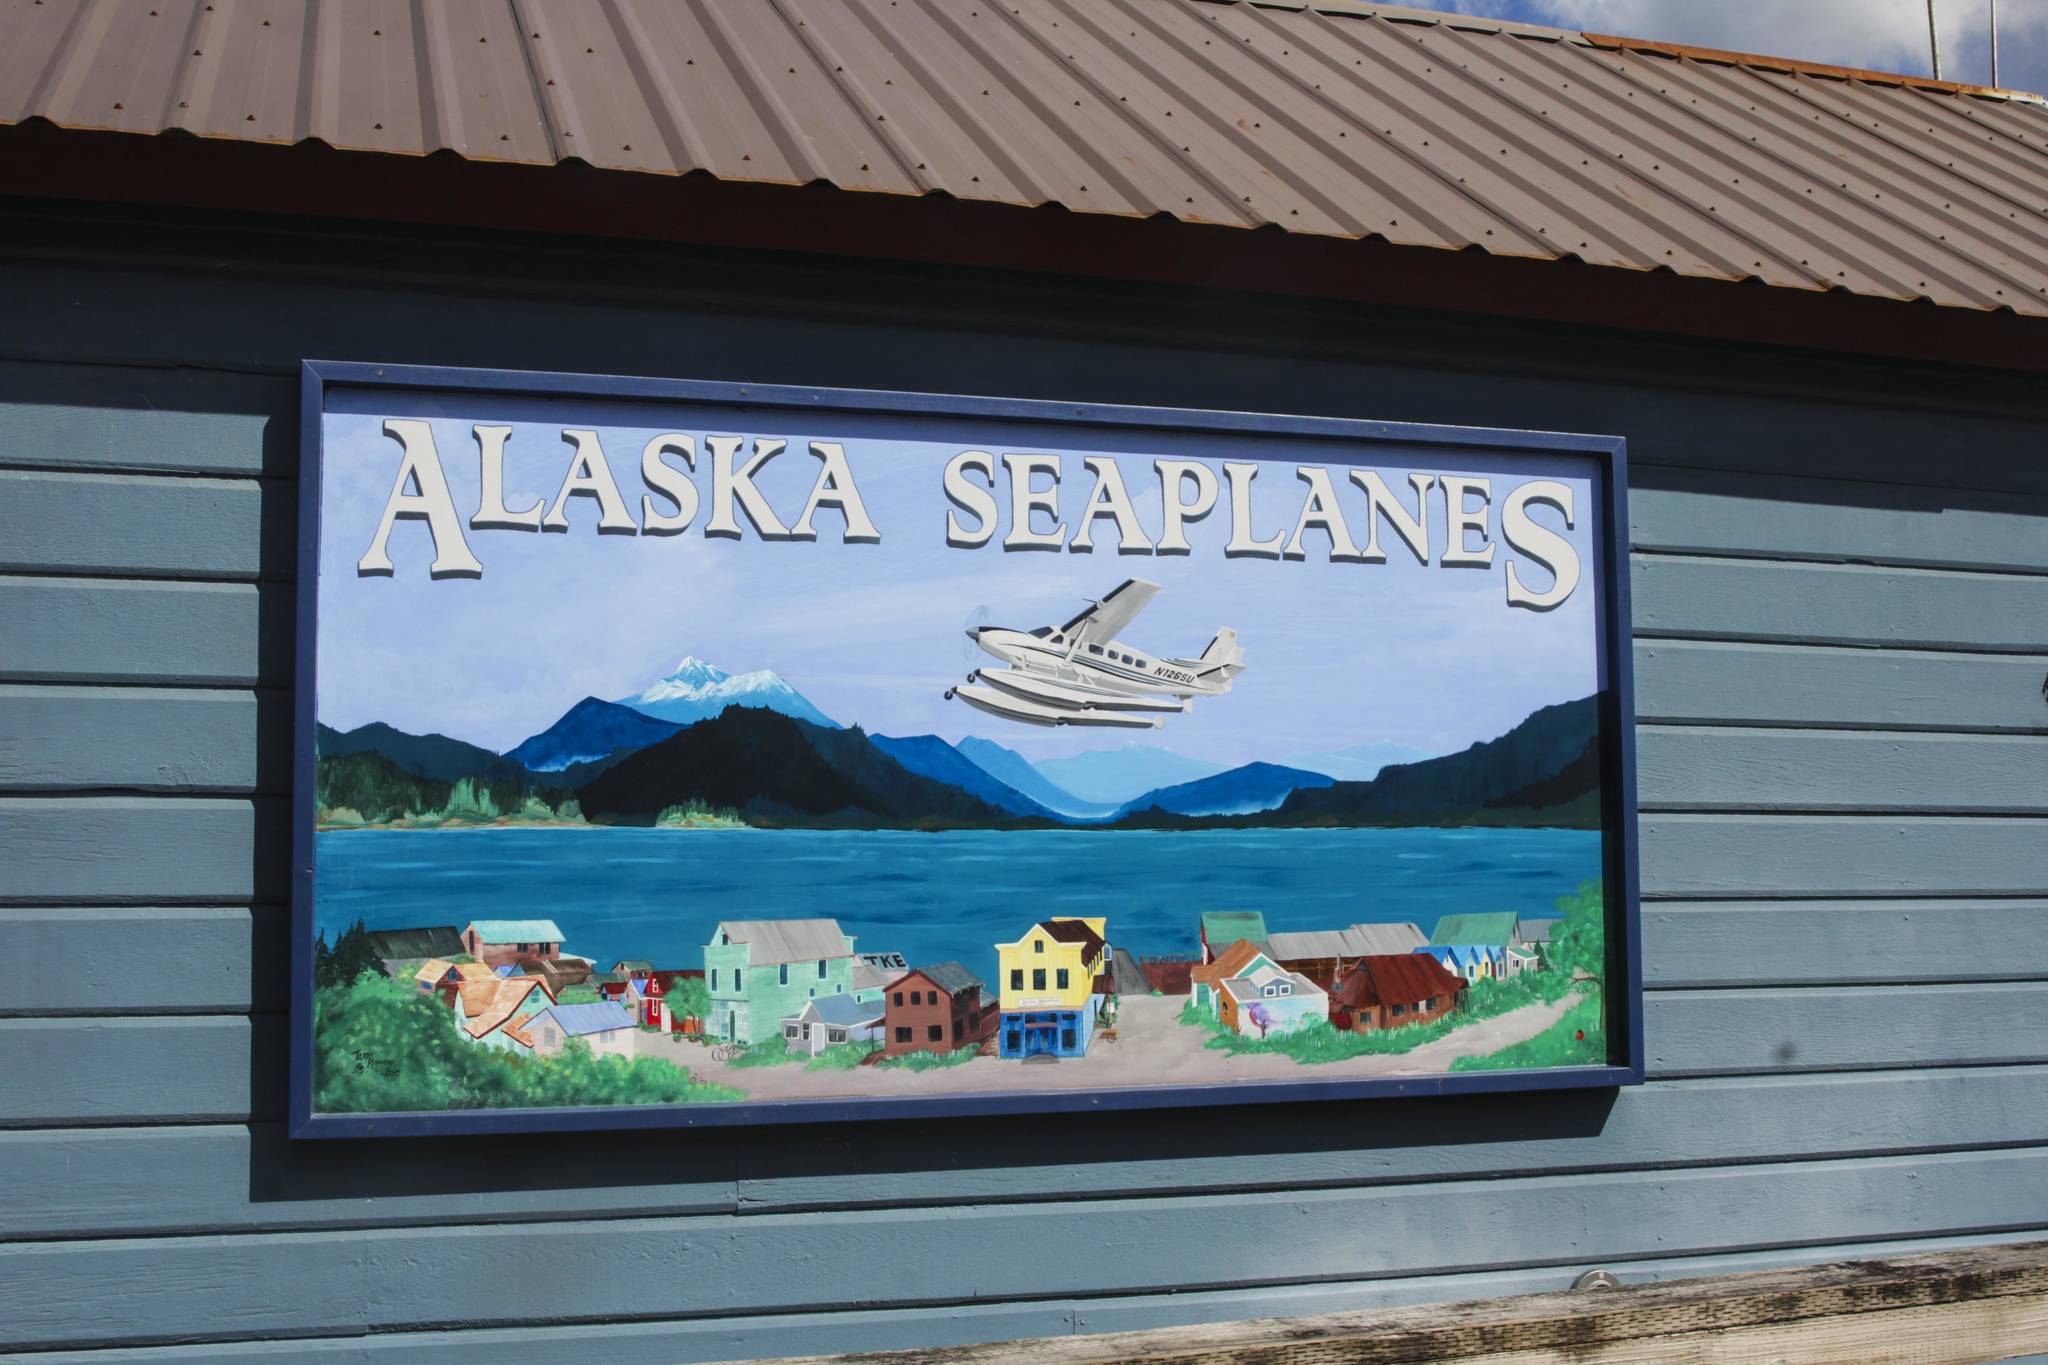 Alaska Seaplanes held a cookout in Tenakee Springs on June 9, 2021, to celebrate the debut of a new seaplane in their fleet in one of the communities that aircraft will serve. (Michael S. Lockett / Juneau Empire)